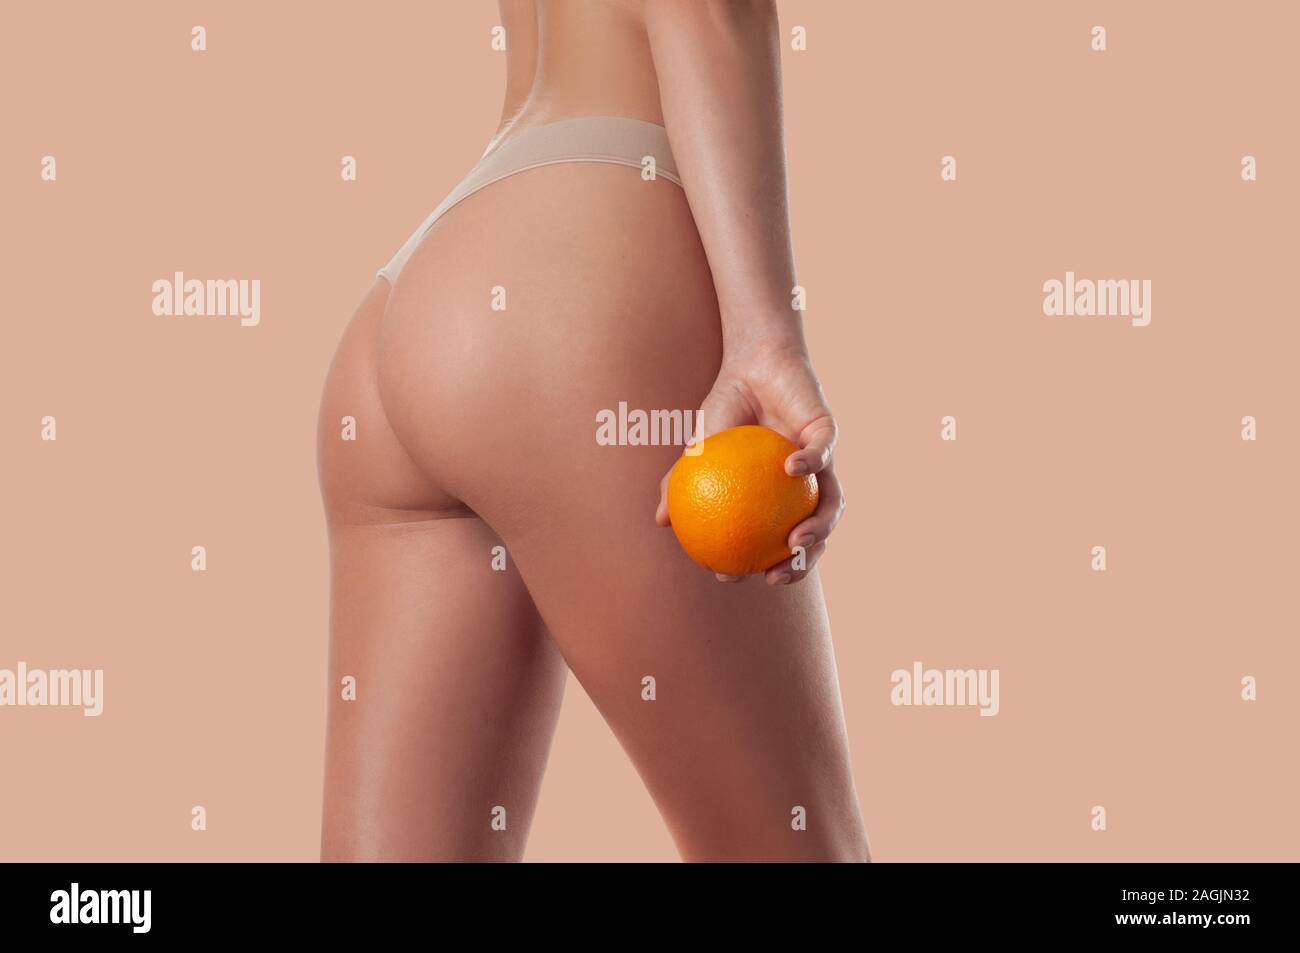 Slim woman is holding orange. Perfect female buttocks without cellulite.  Beautiful woman's butt in underwear. Body care and anti cellulite massage  Stock Photo - Alamy